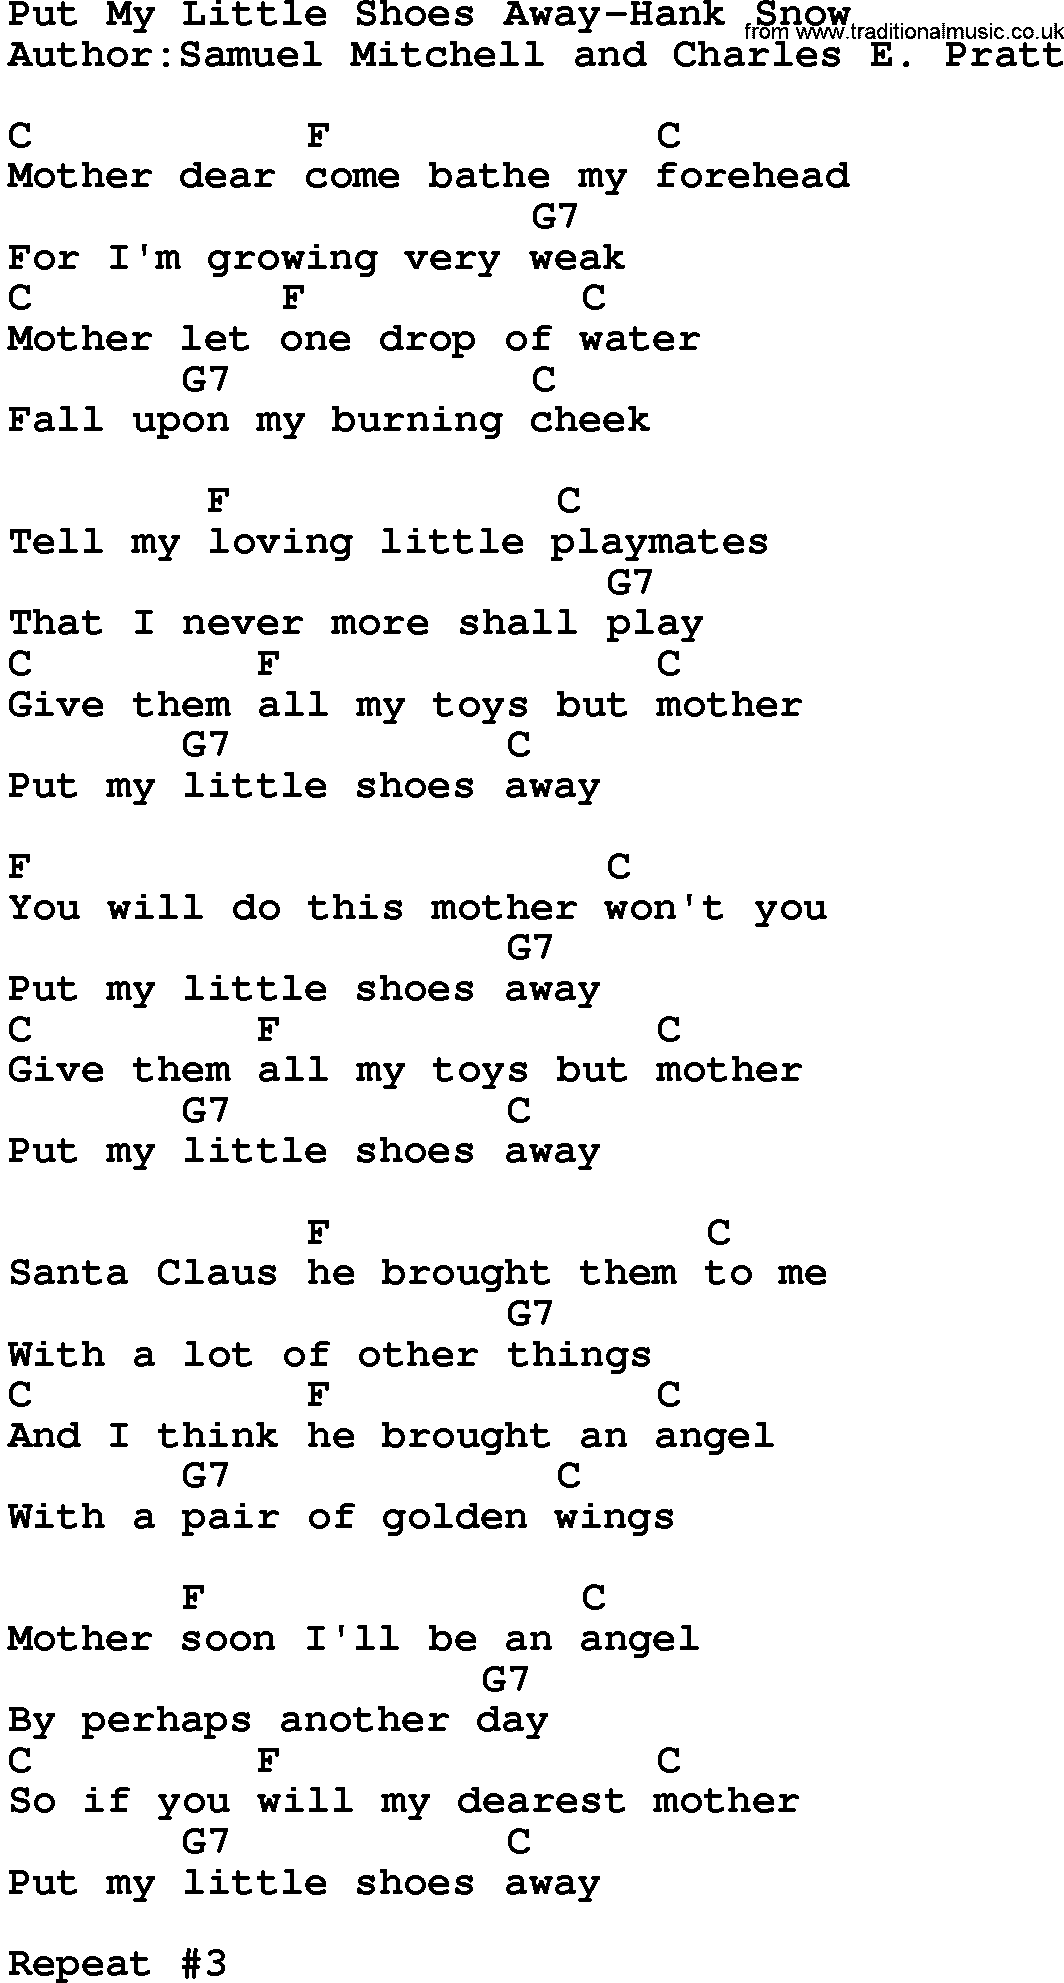 Country music song: Put My Little Shoes Away-Hank Snow lyrics and chords